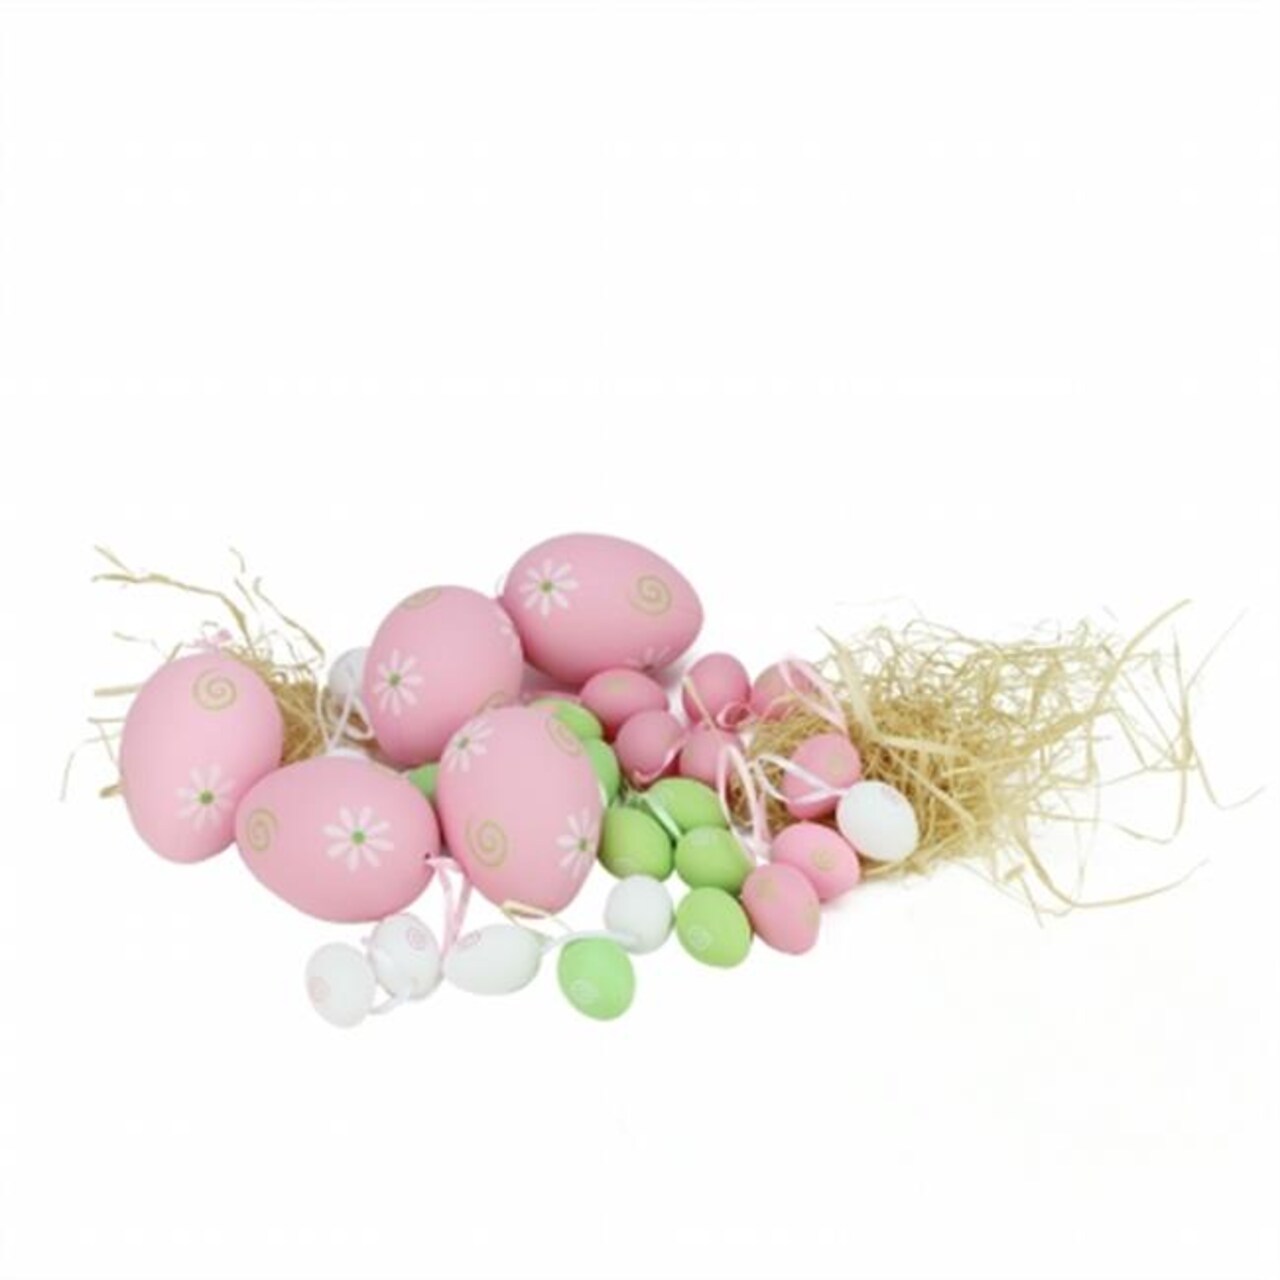 Gordon 32013884 3.25 in. Pastel Pink, Green &#x26; White Painted Floral Spring Easter Egg Ornaments, Set of 29